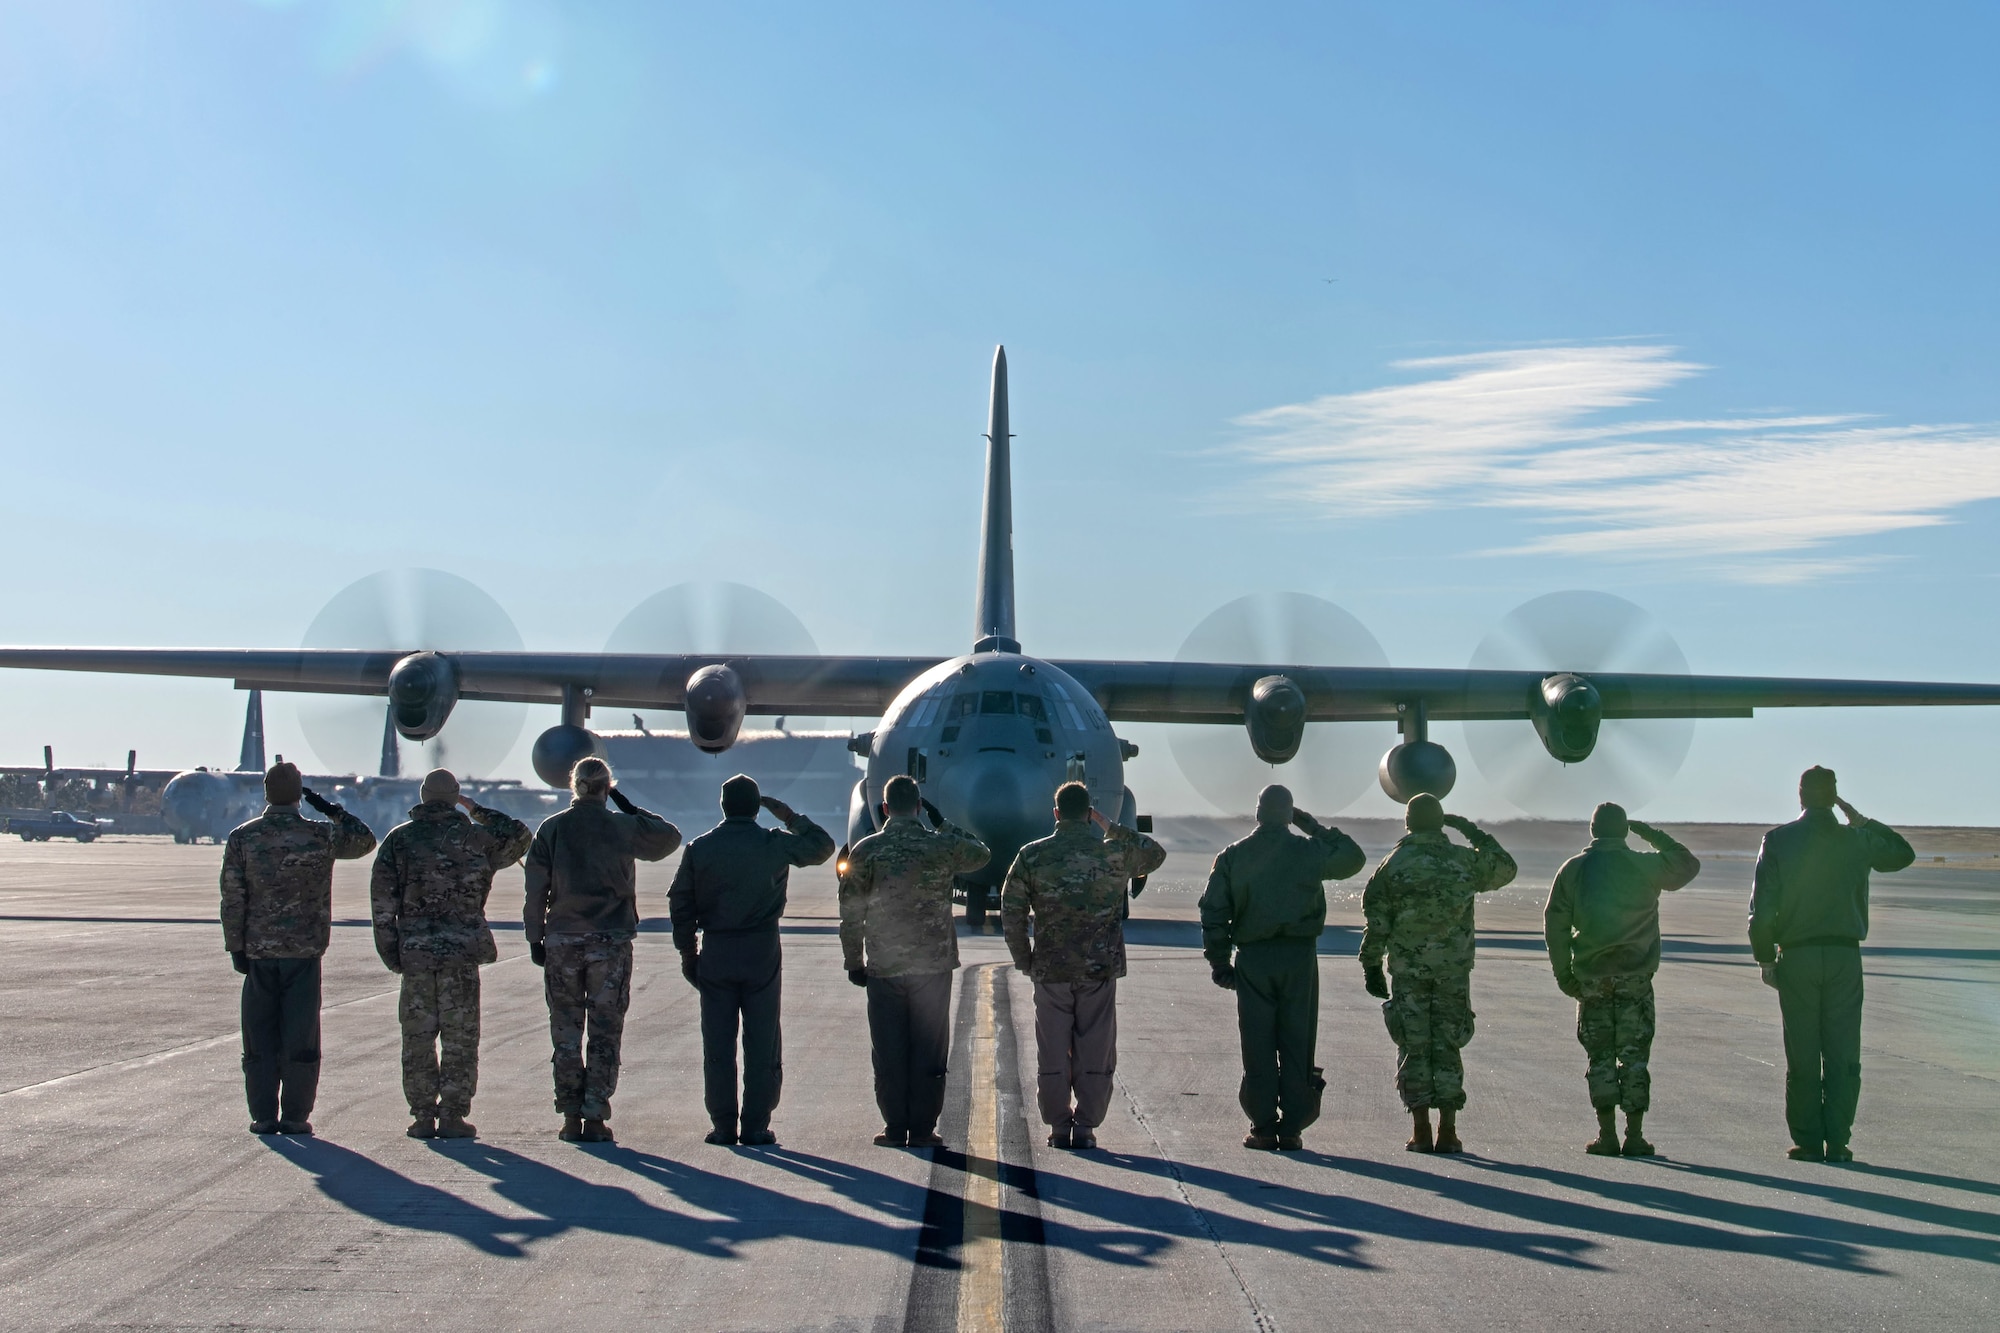 Leadership from the 302nd Airlift Wing deliver a salute to members aboard a C-130 aircraft before they depart to an undisclosured location Feb. 5, 2021, Peterson Air Force Base, Colorado.